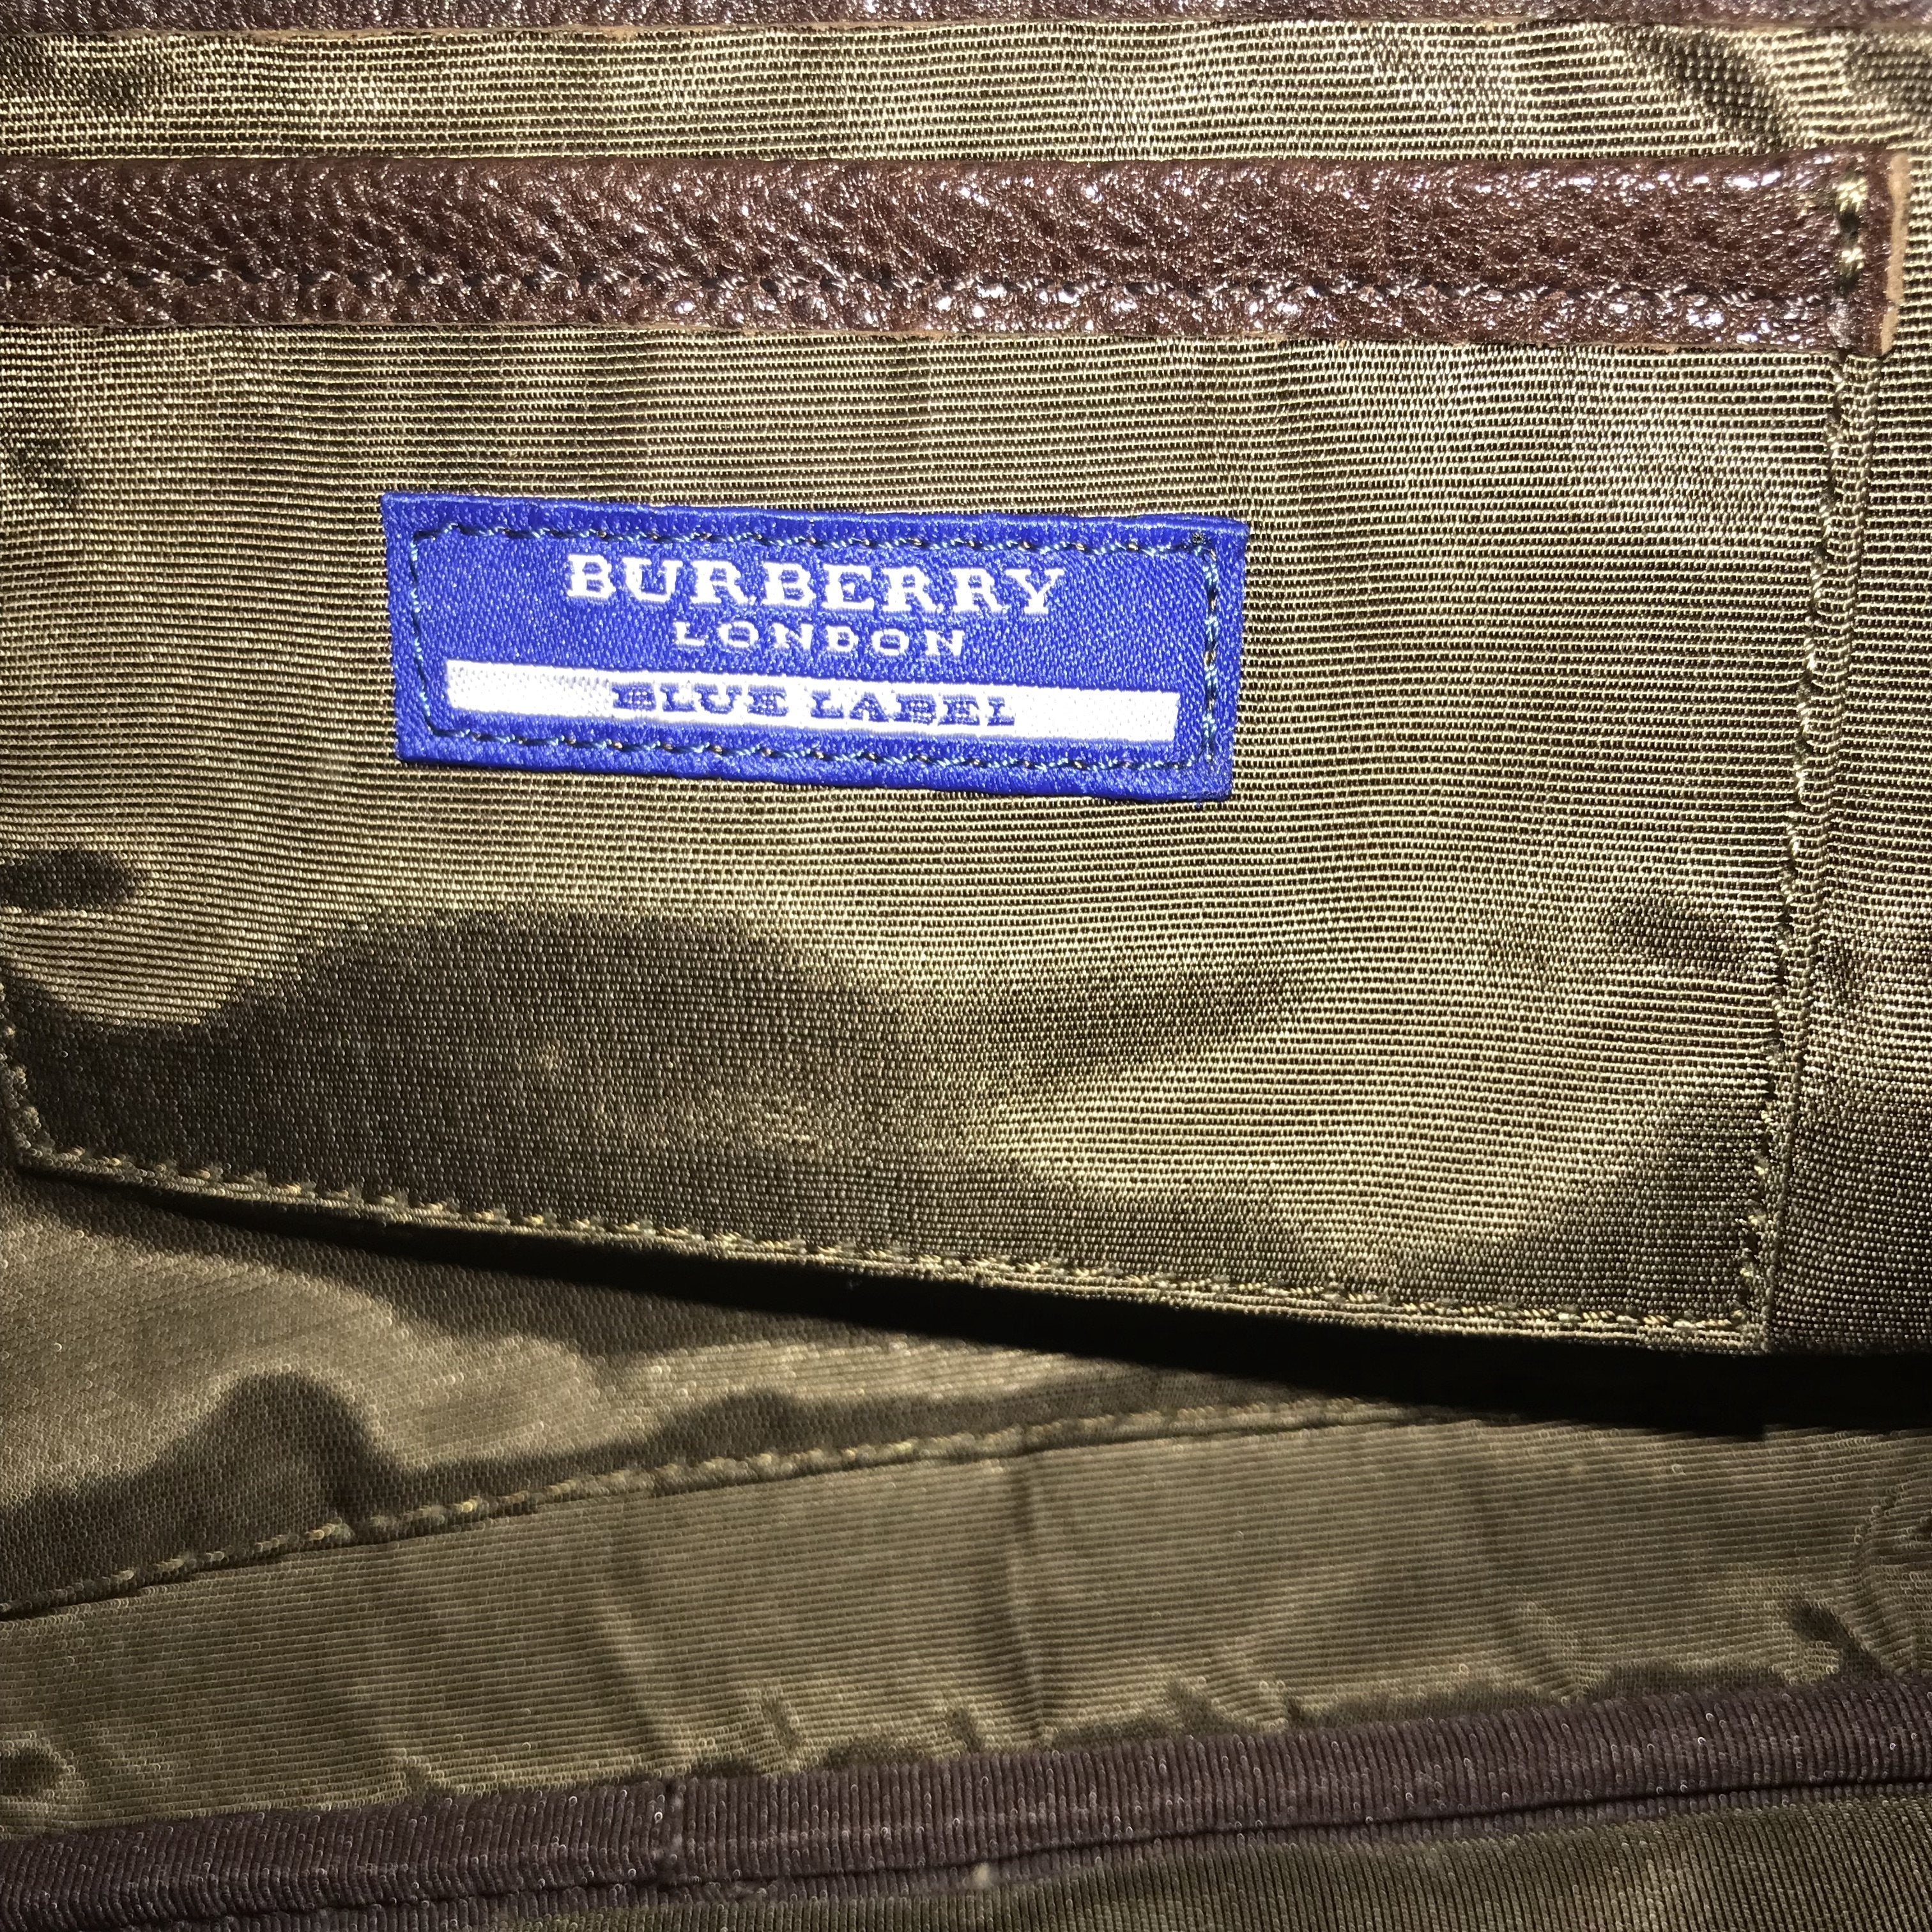 Burberry, Bags, Burberry Blue Label Tote Bag Coa Included